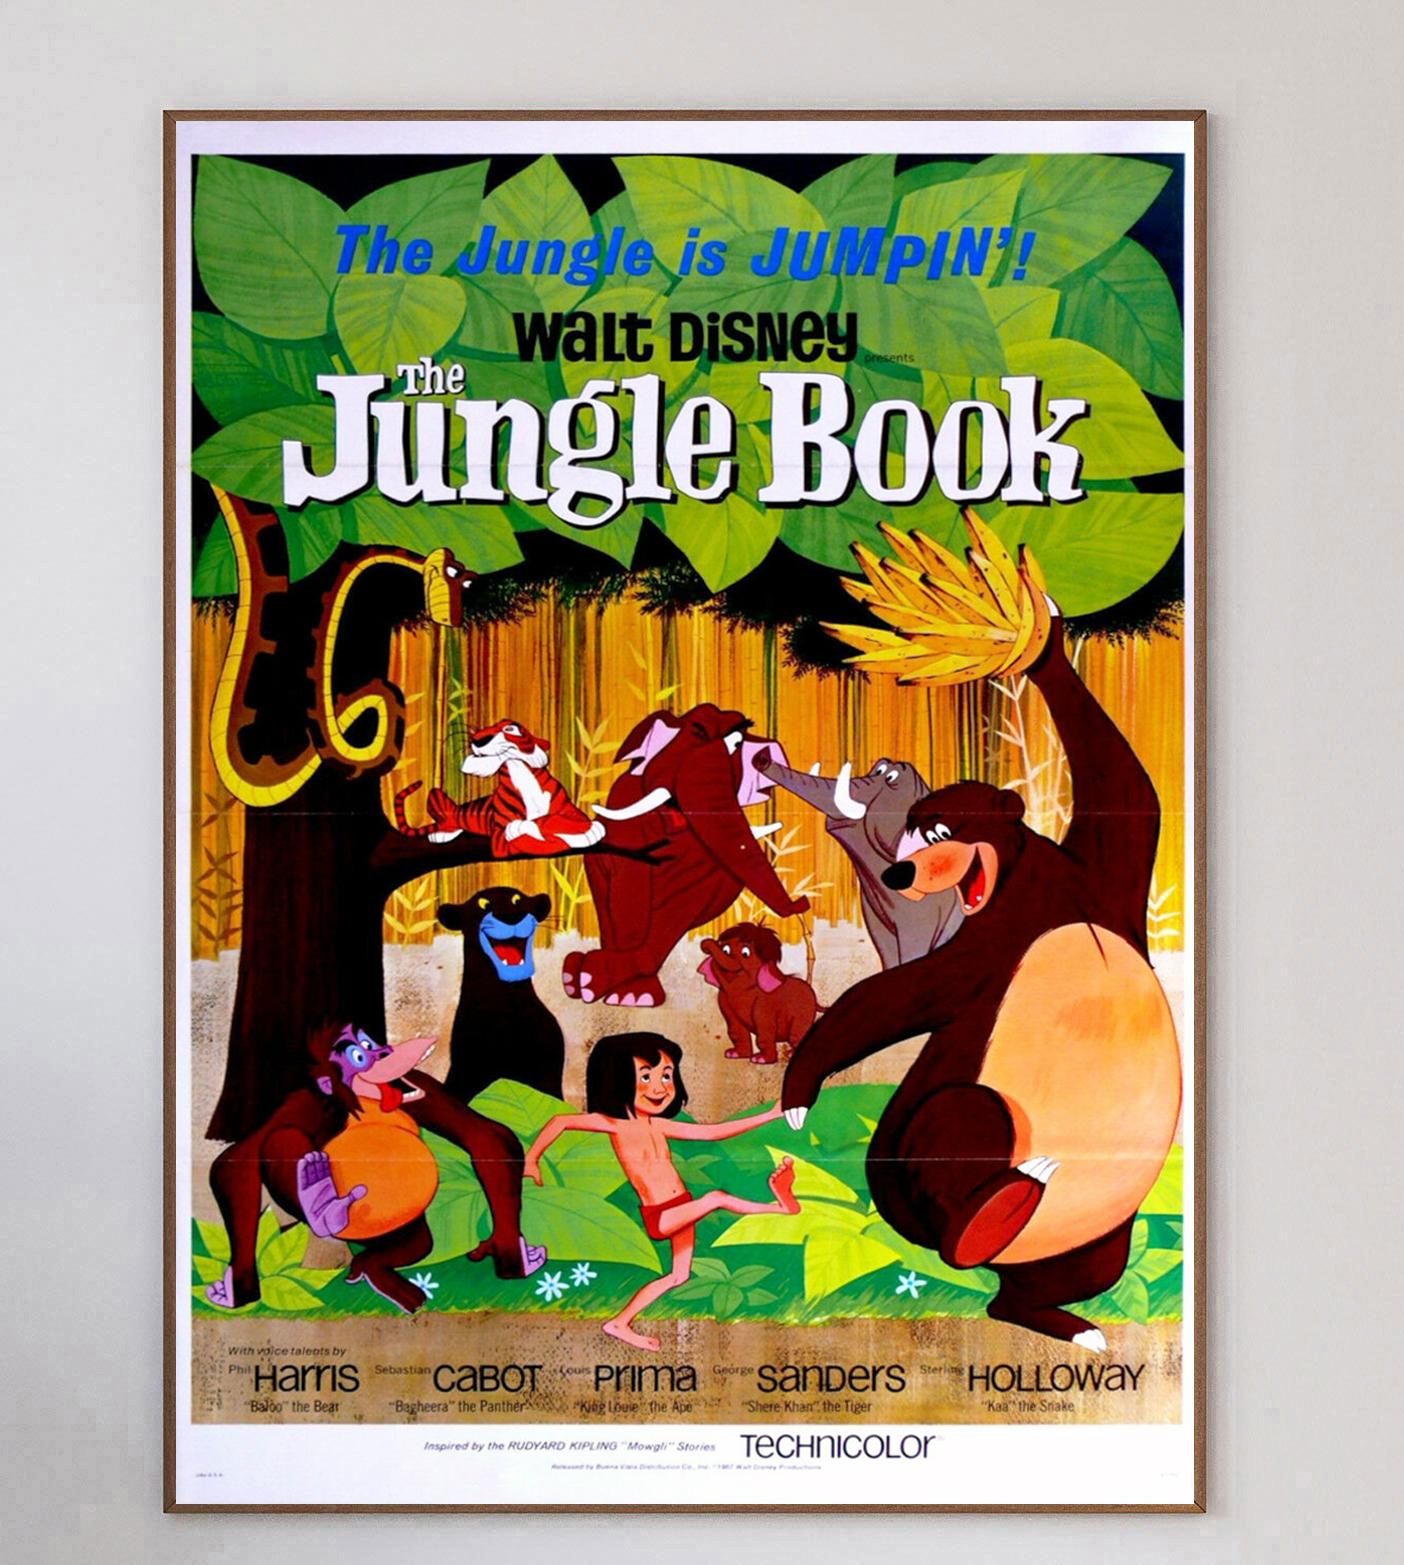 Released in 1967 to great acclaim, Walt Disney Productions' 